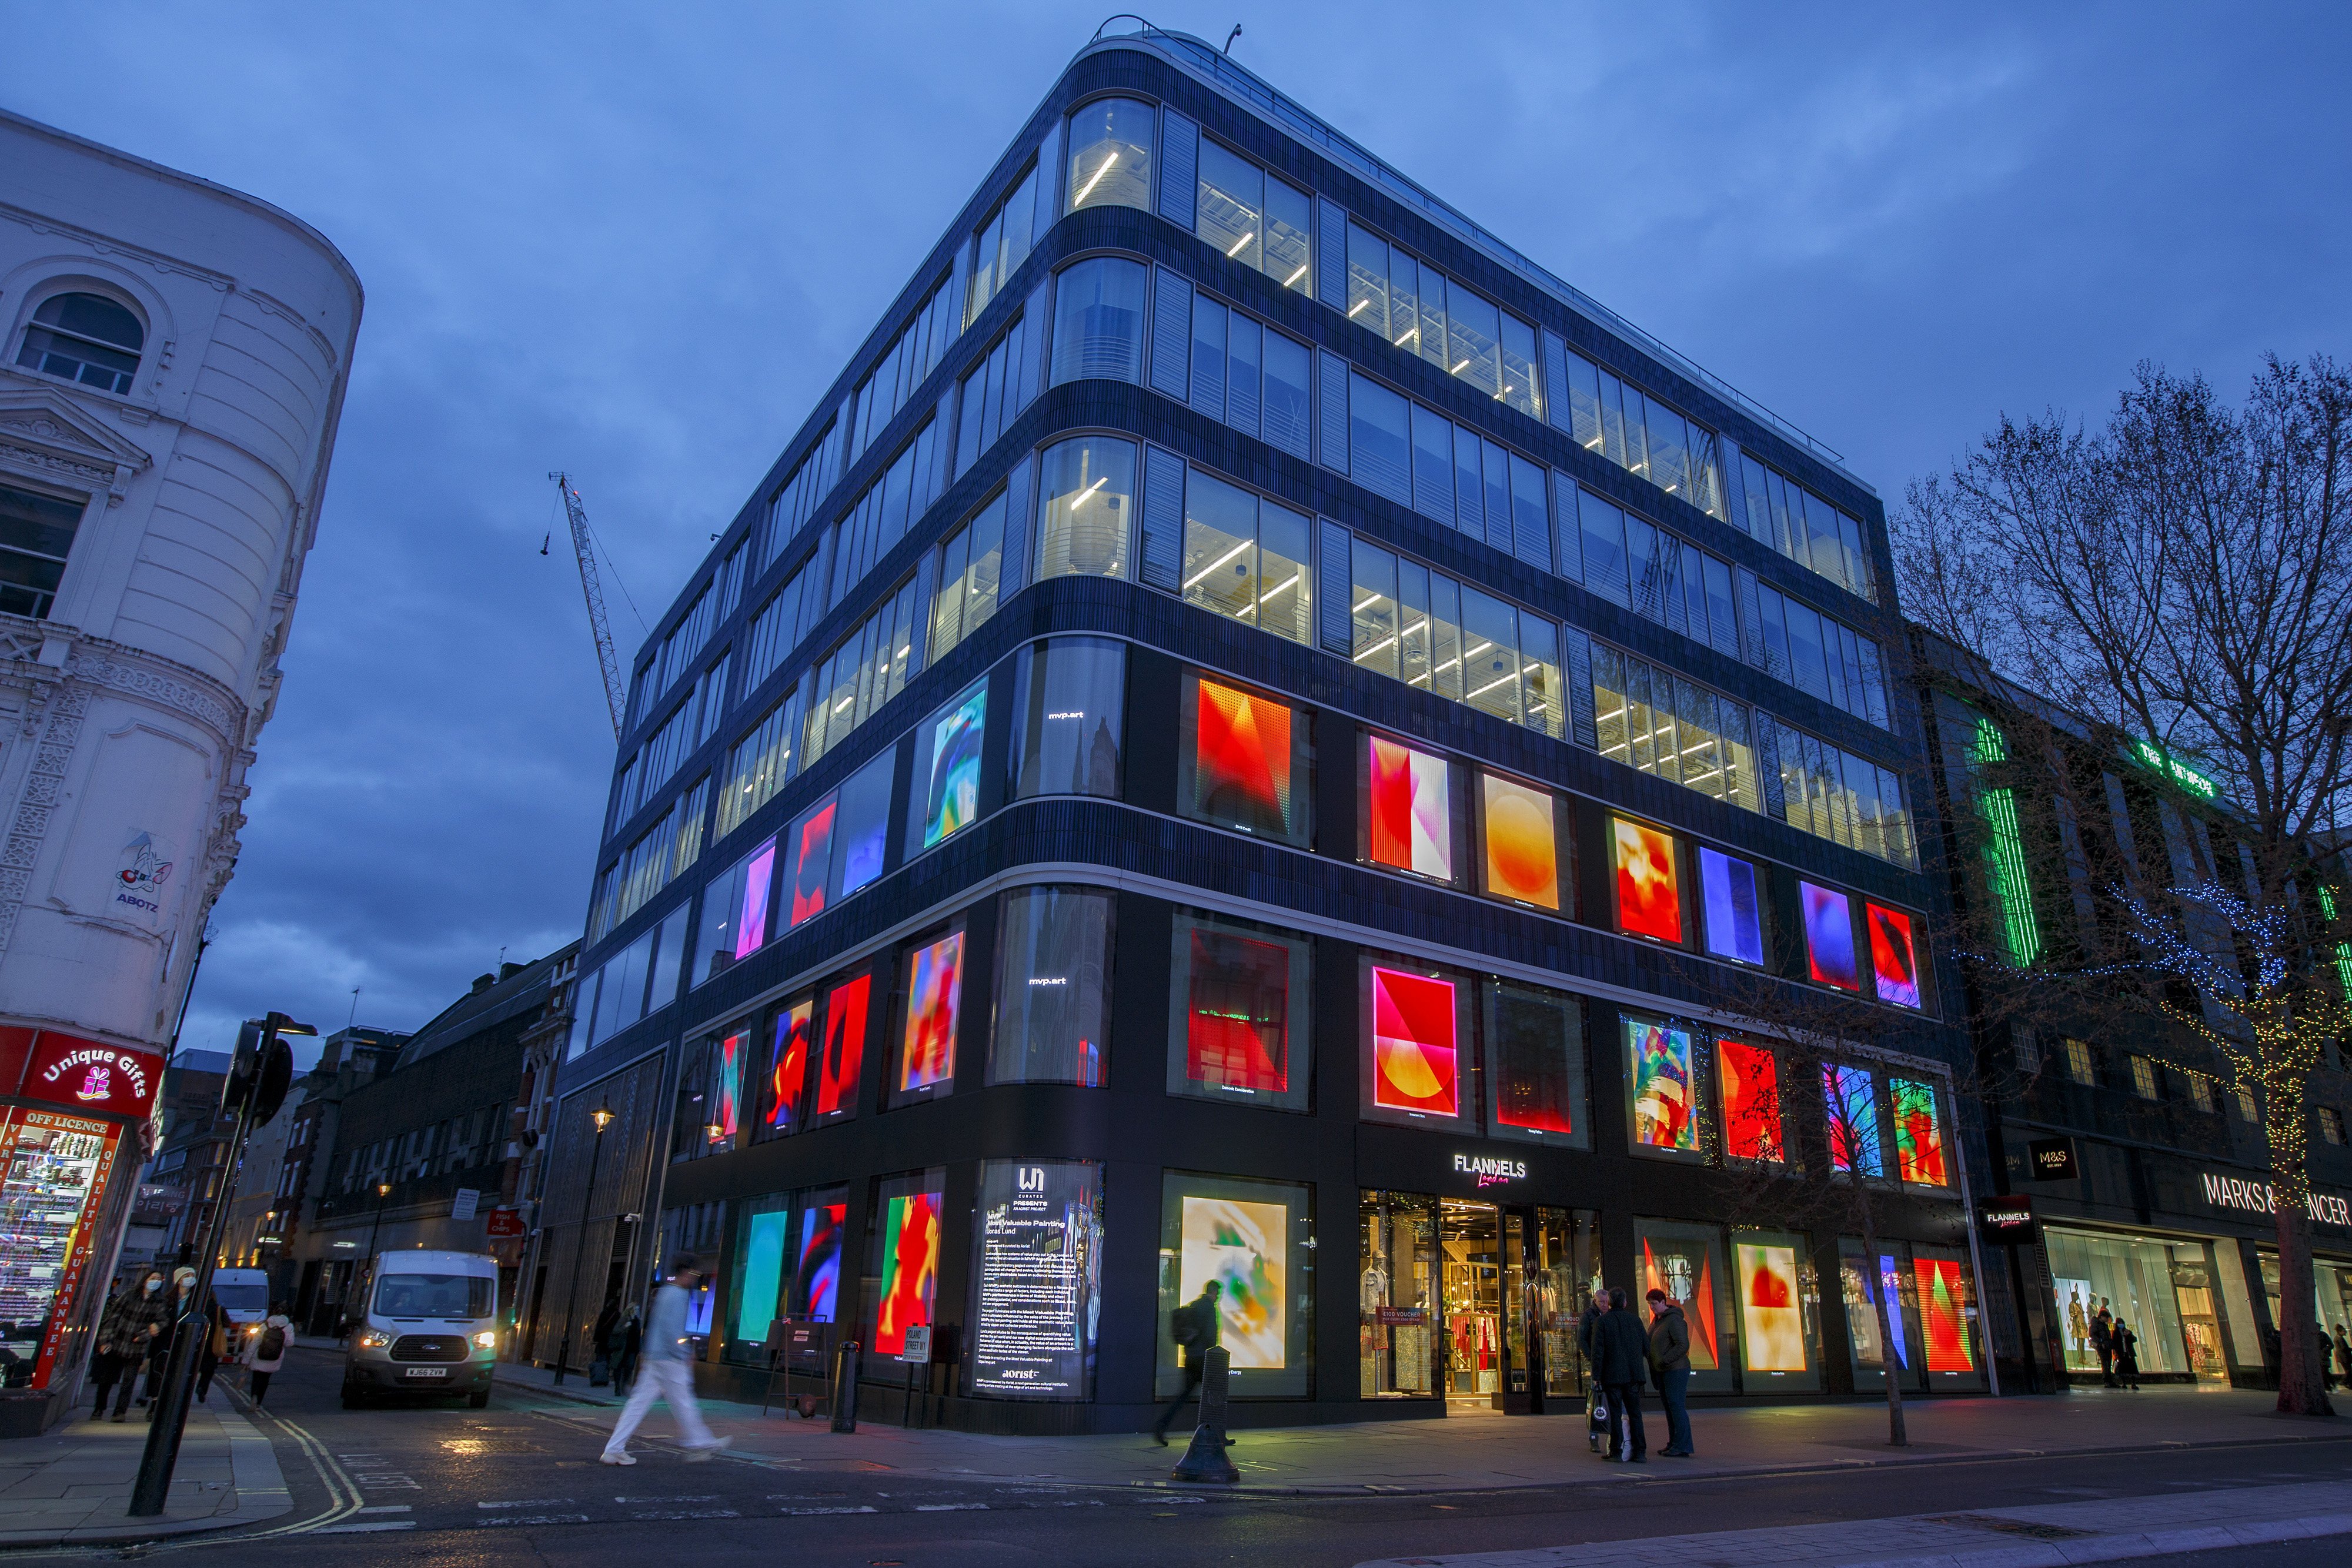 A series of NFT artworks collectively titled ‘MVP Most Valuable Painting’ by artist Jonas Lund is displayed on screens in the windows of The Flannels Group department store on Oxford Street in London on April 4. Photo: Bloomberg